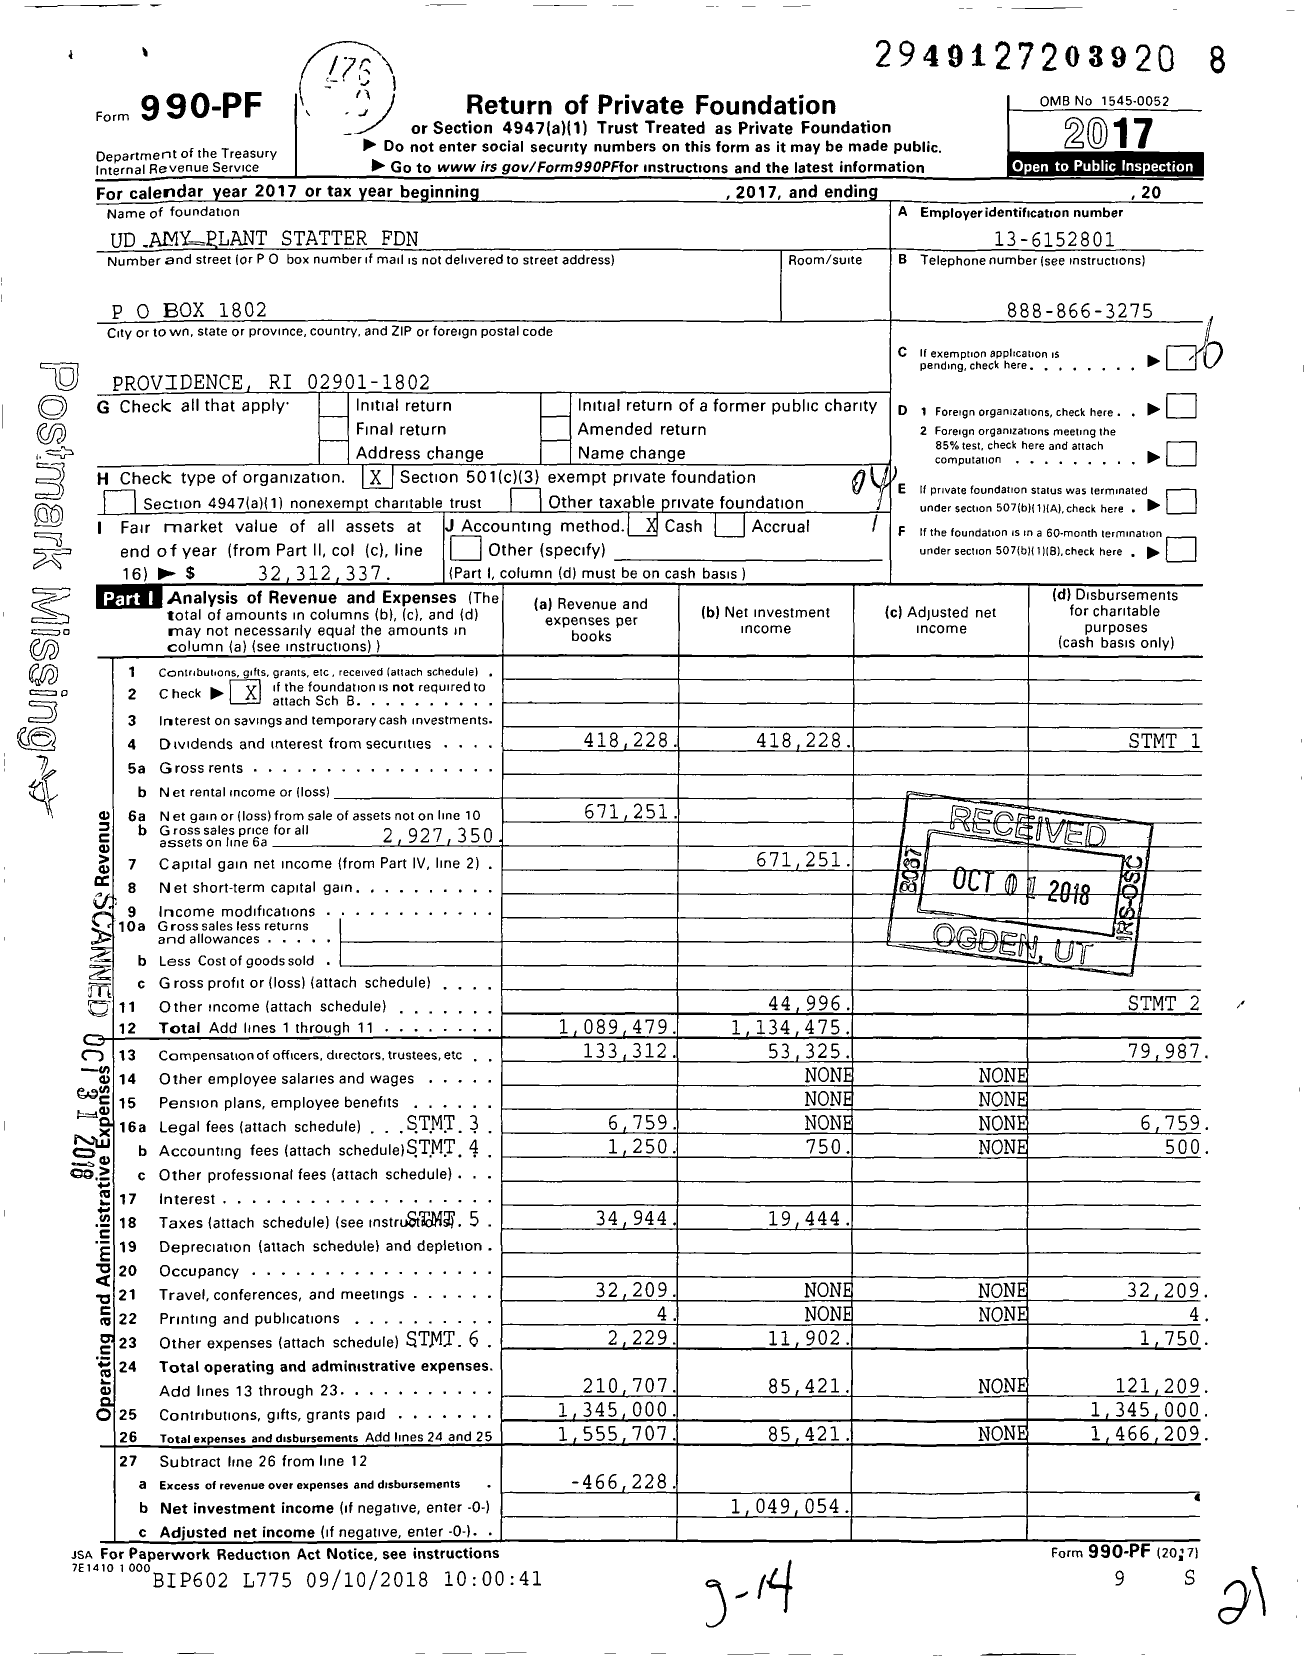 Image of first page of 2017 Form 990PF for Ud Amy Plant Statter Foundation